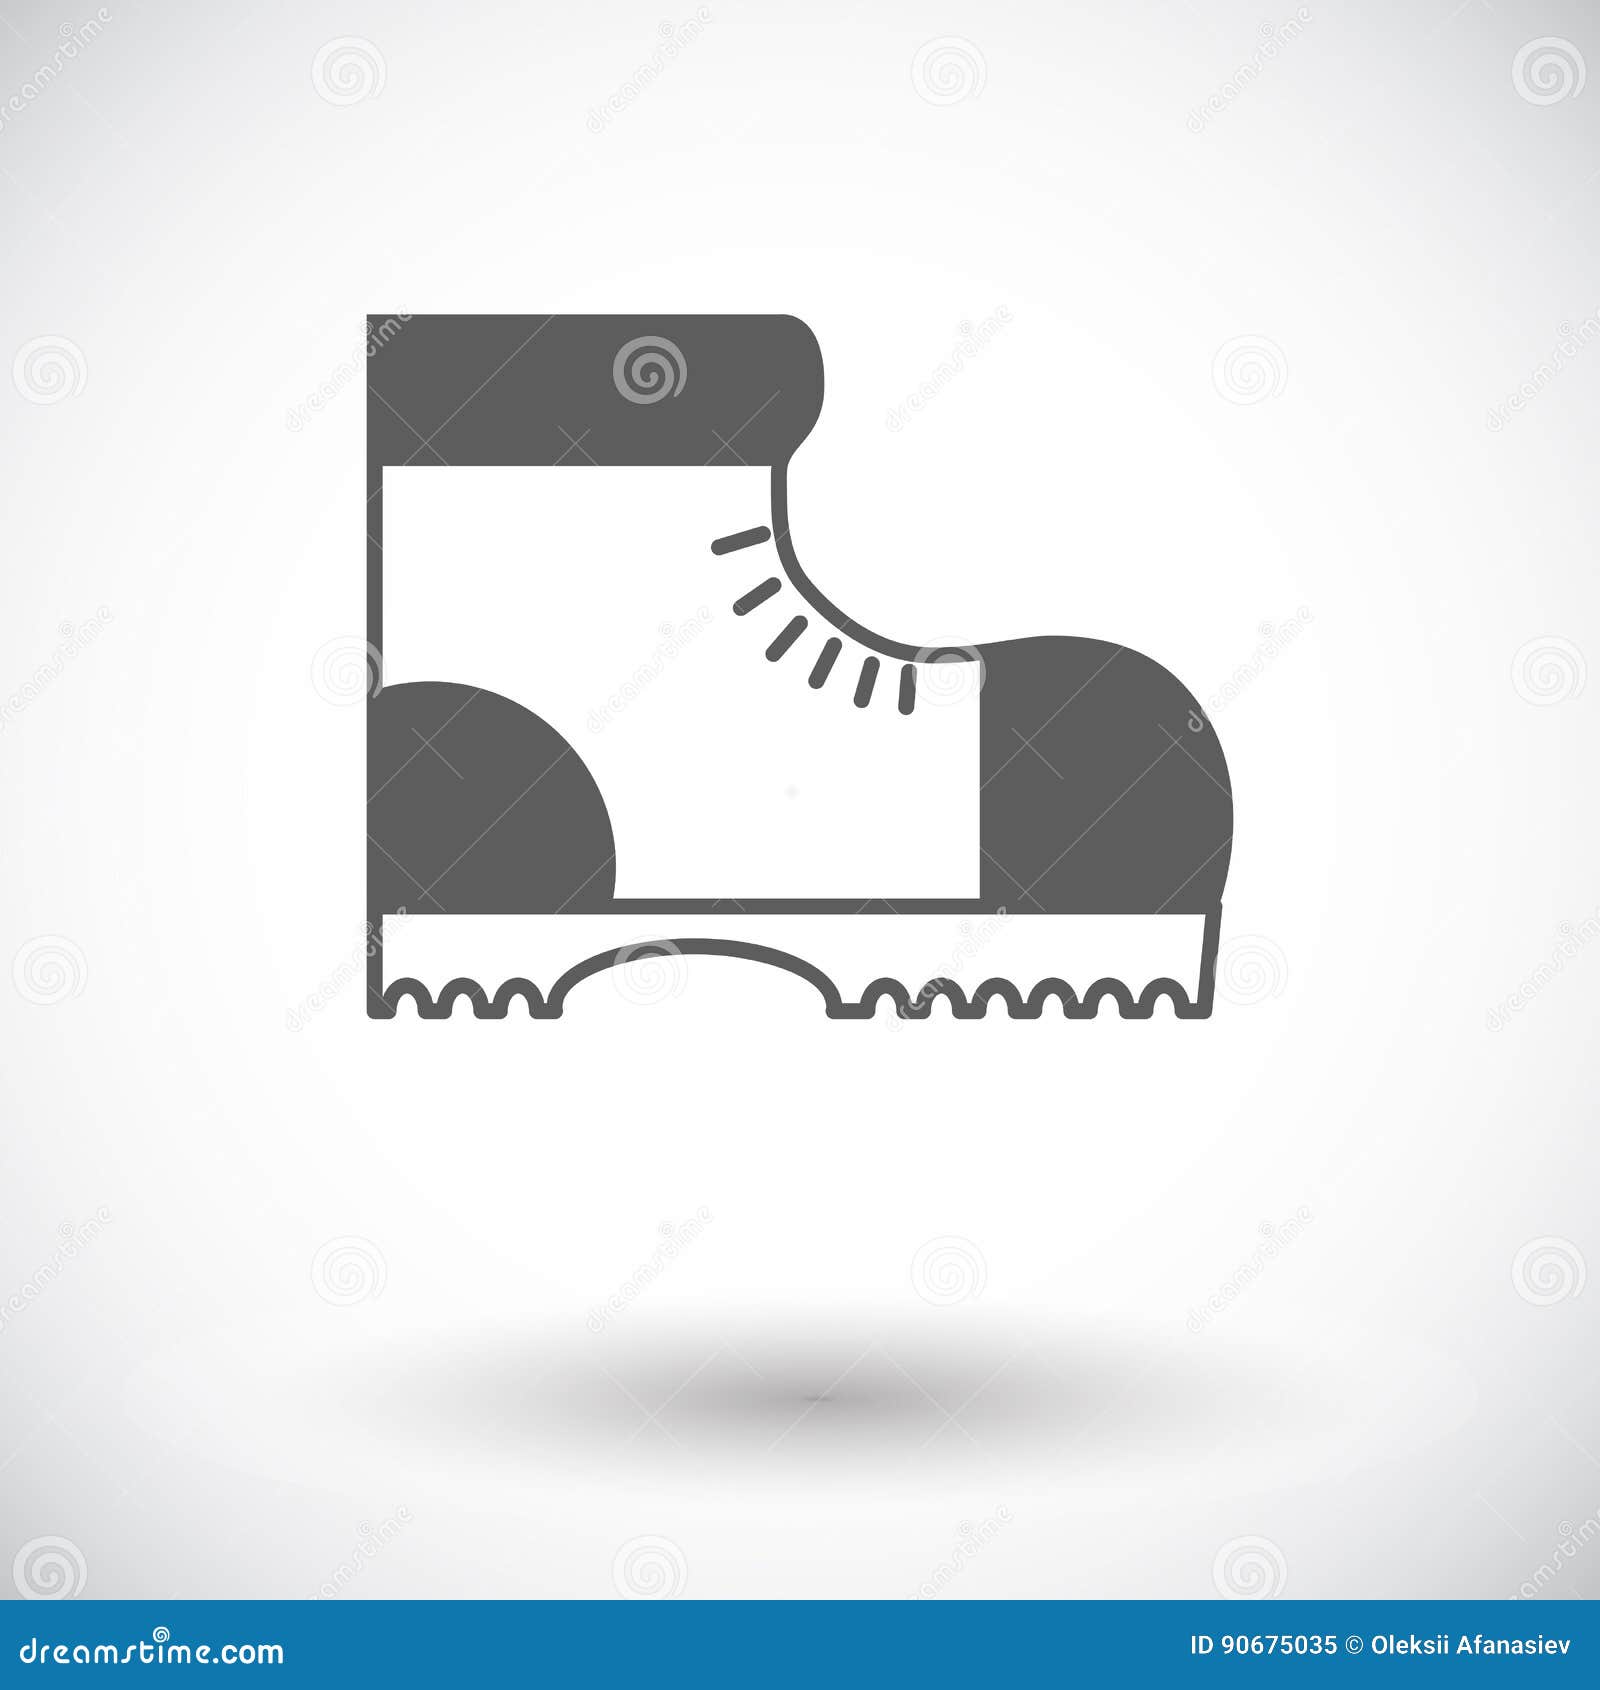 Hiking shoes stock vector. Illustration of object, shoes - 90675035